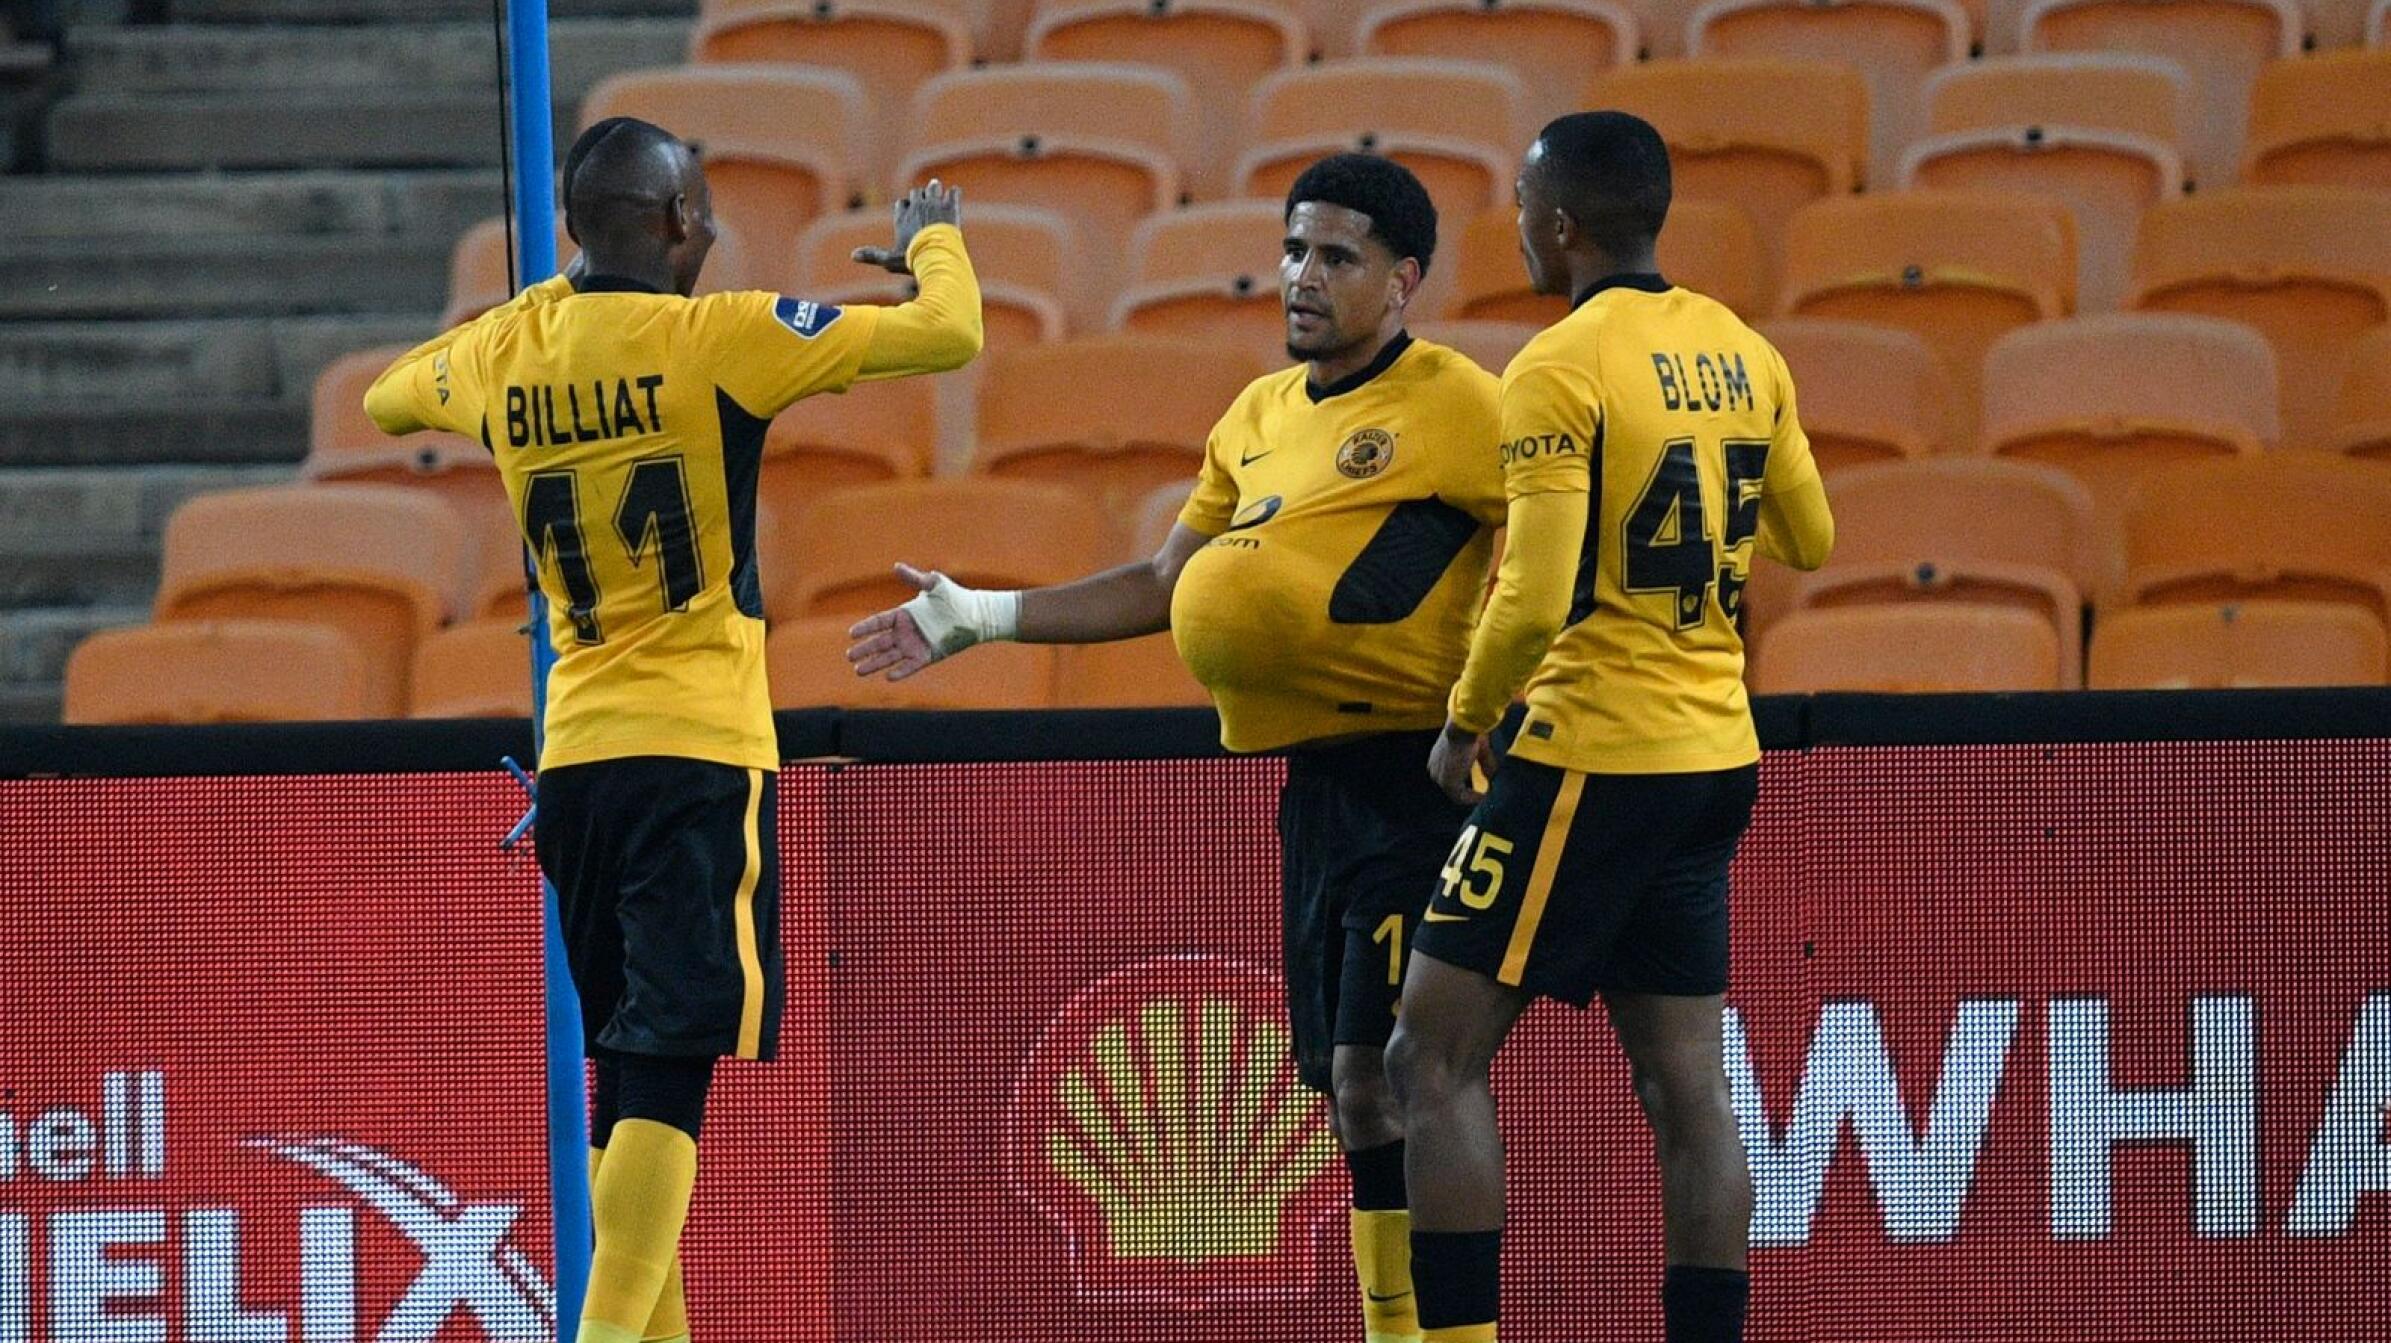 Kaizer Chiefs’ Keagan Dolly celebrates with Khama Billiat and Njabulo Blom after scoring the winning goal during their DStv Premiership game against Marumo Gallants FC at FNB Stadium on Tuesday